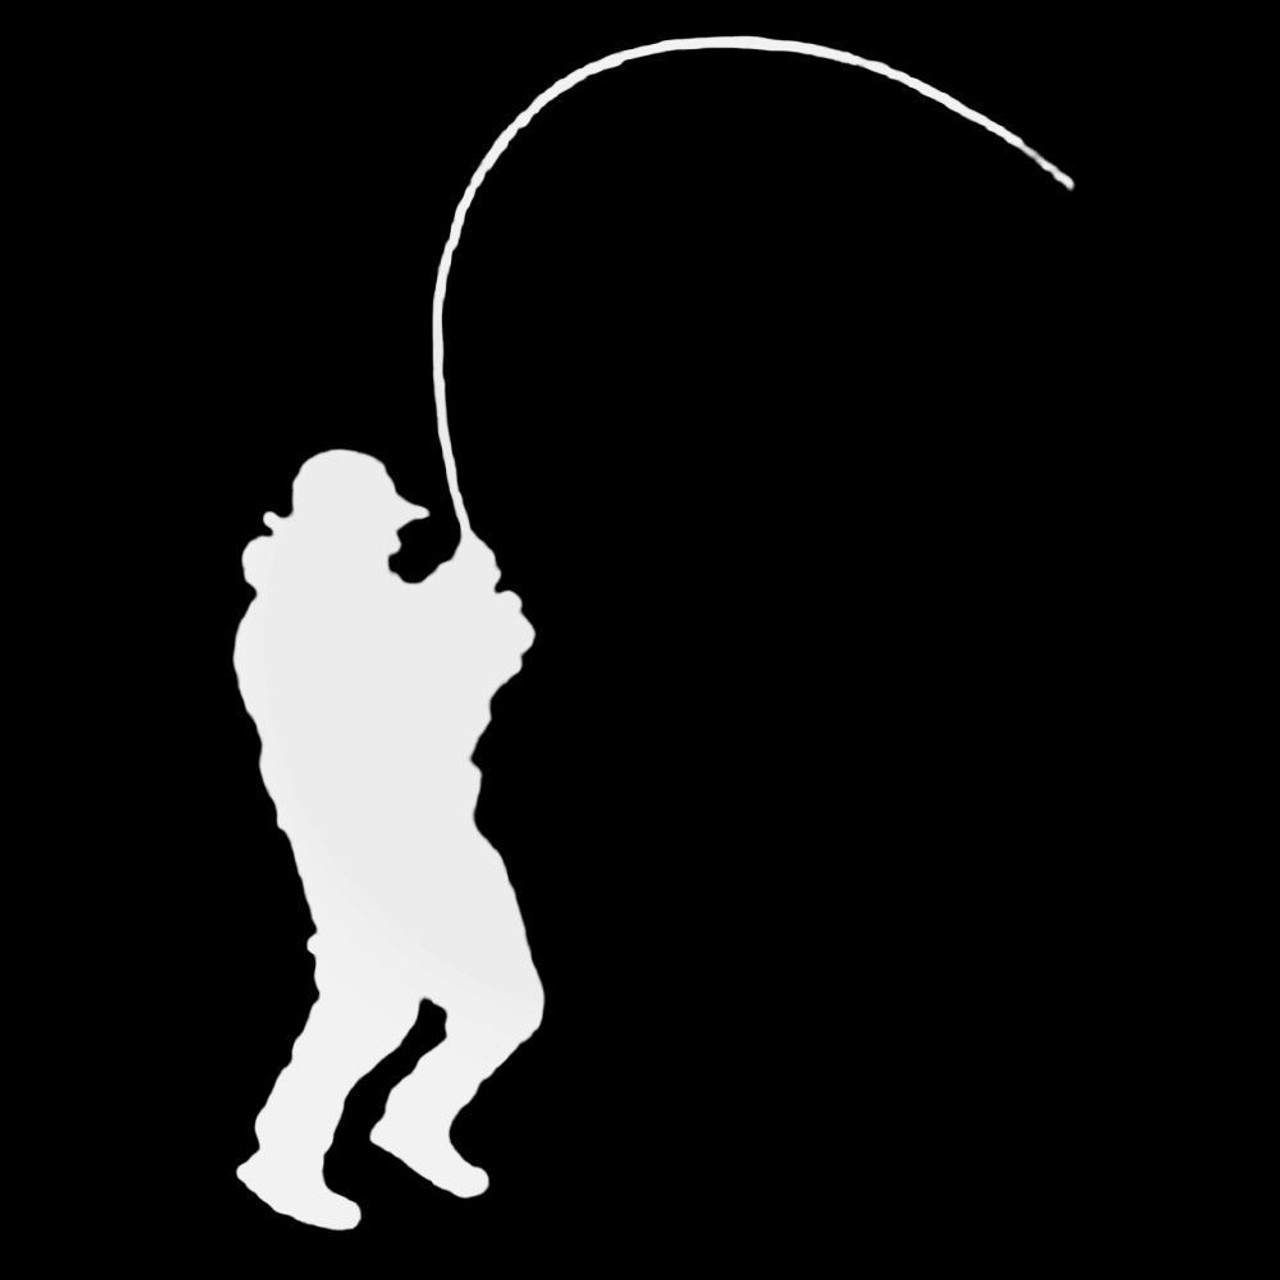 Fisherman Silhouette Style 2 Decal Sticker